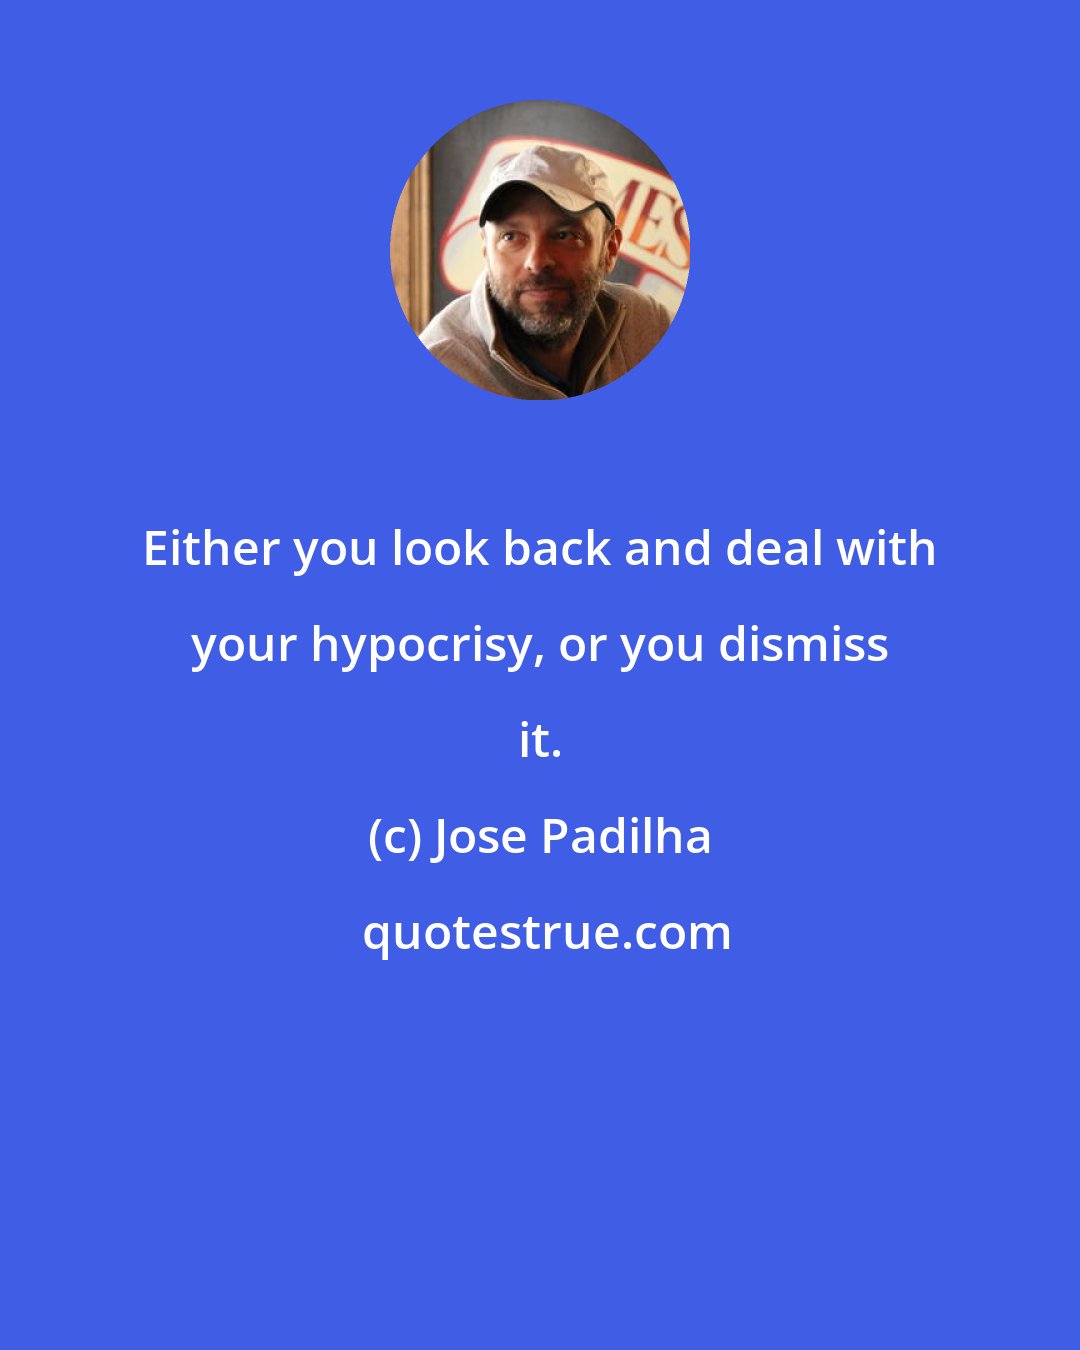 Jose Padilha: Either you look back and deal with your hypocrisy, or you dismiss it.